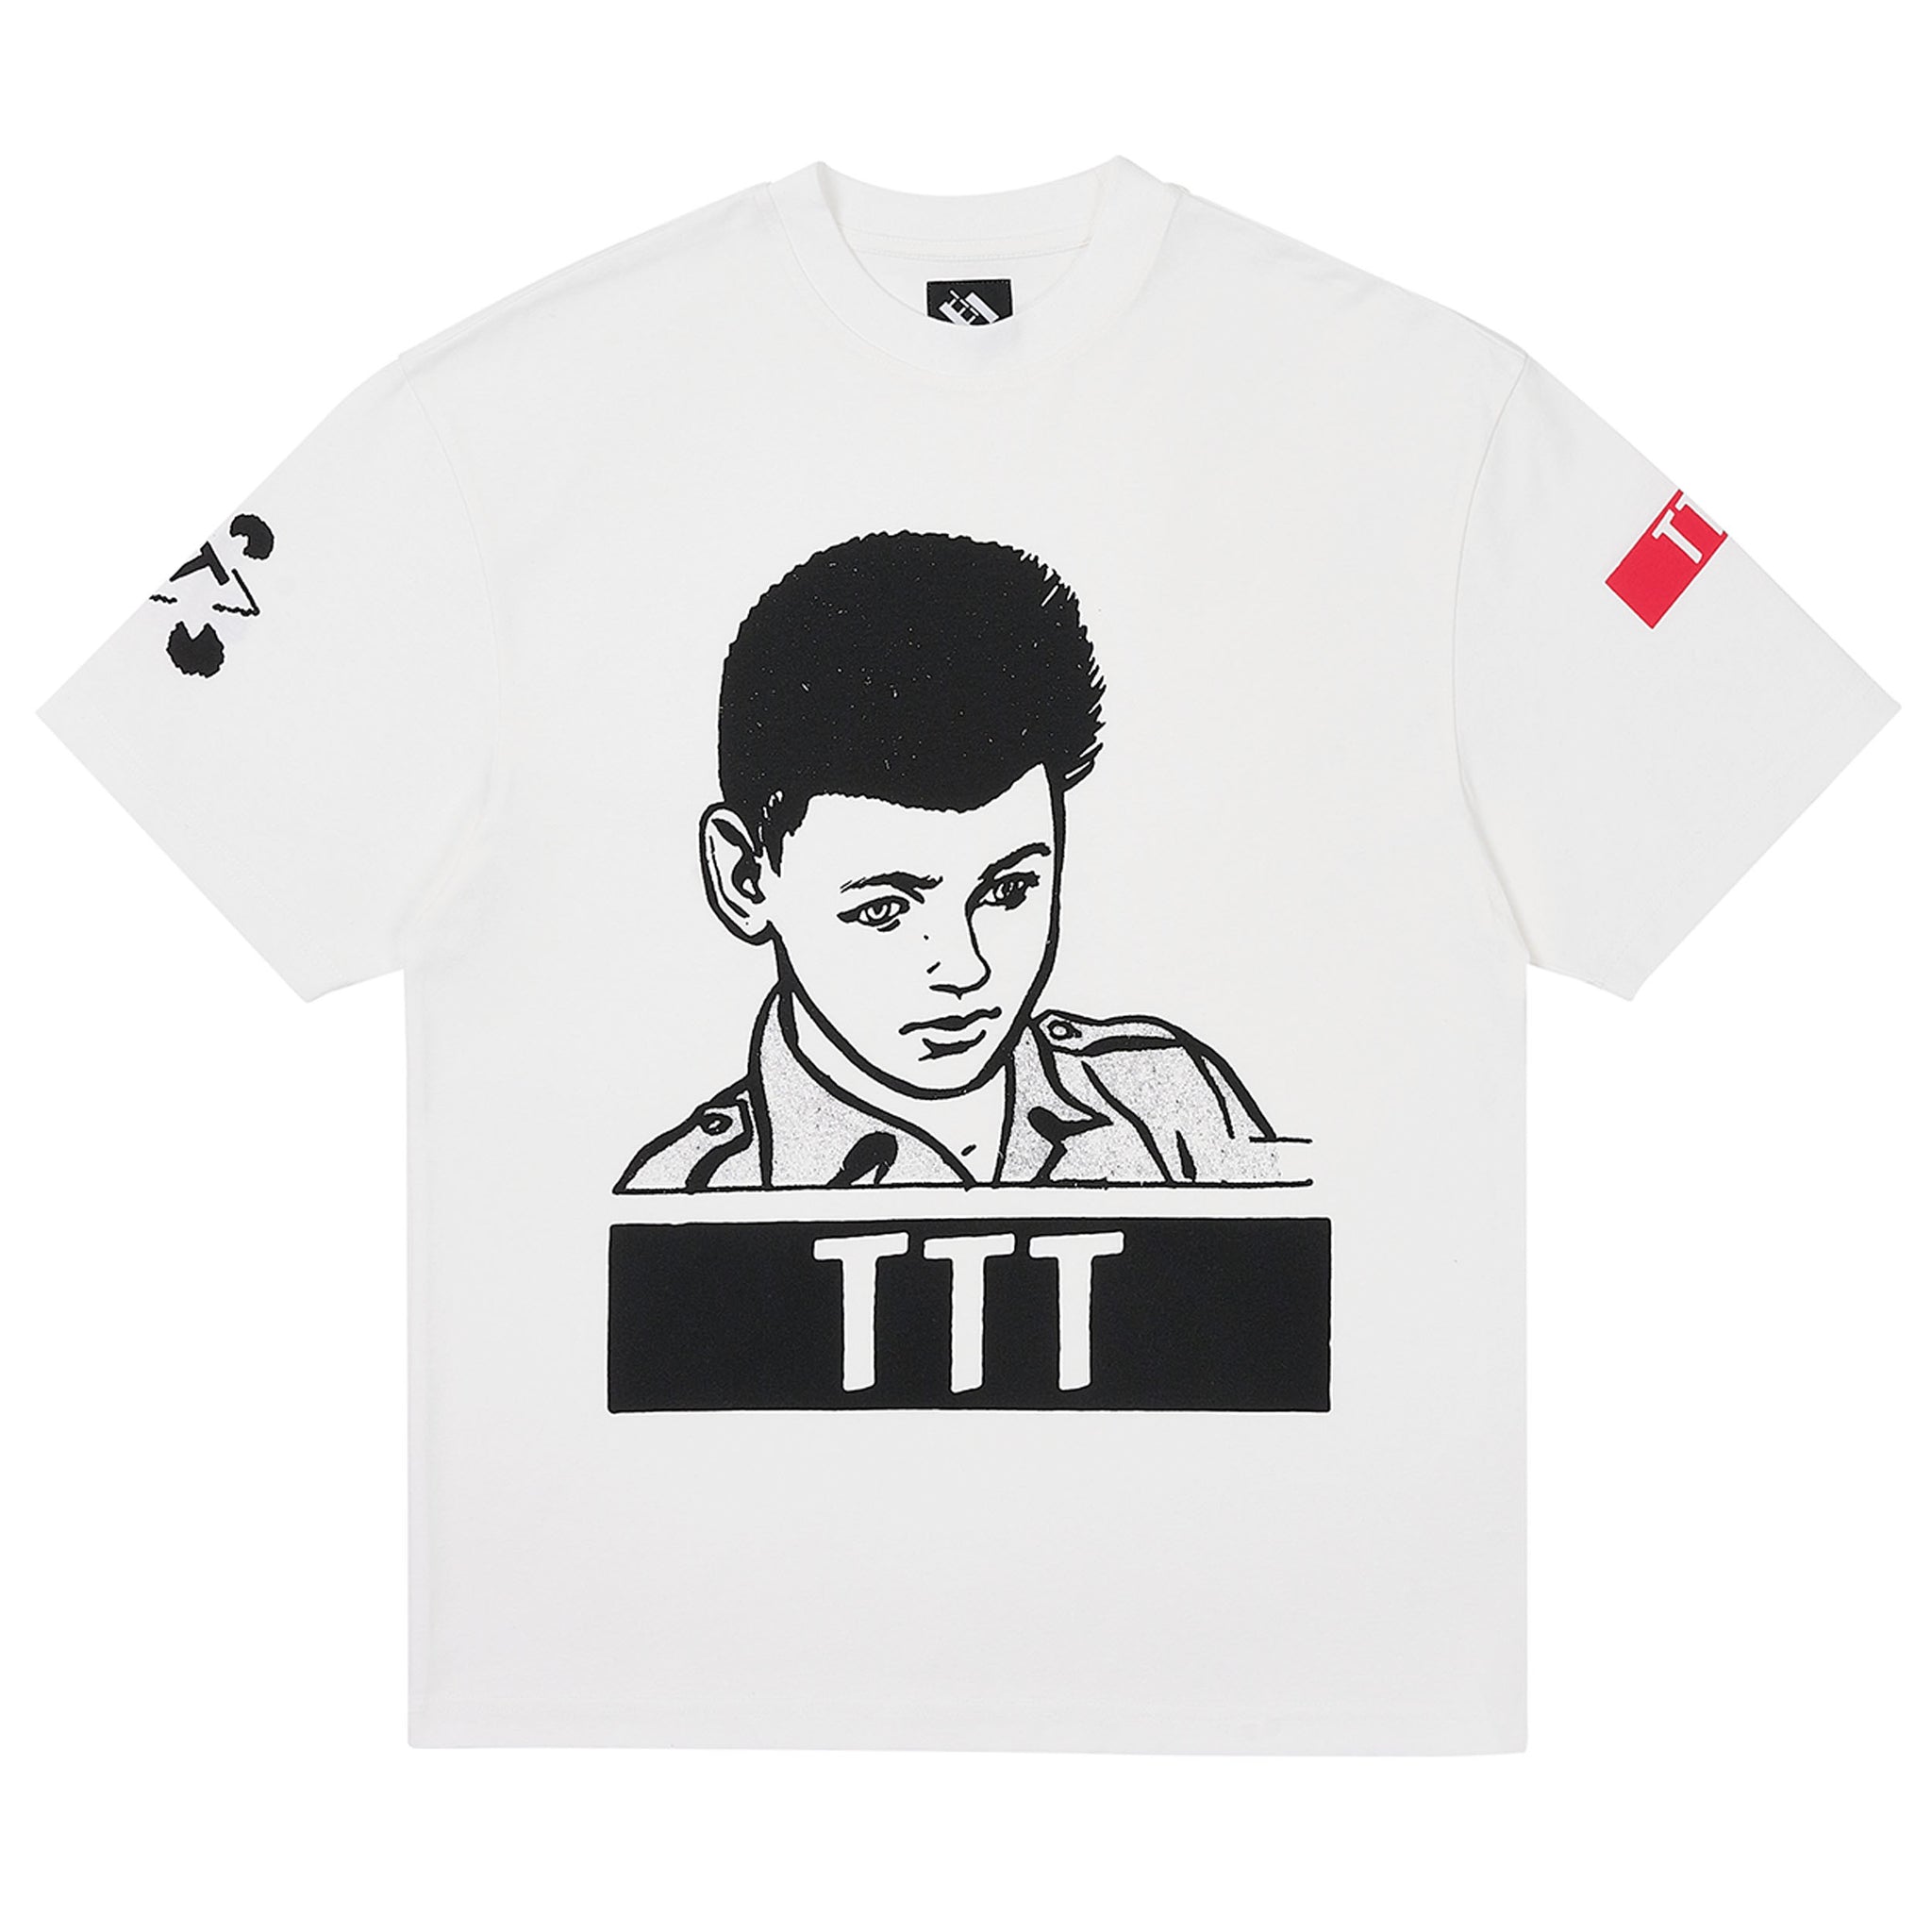 The Trilogy Tapes Boy T-Shirt White